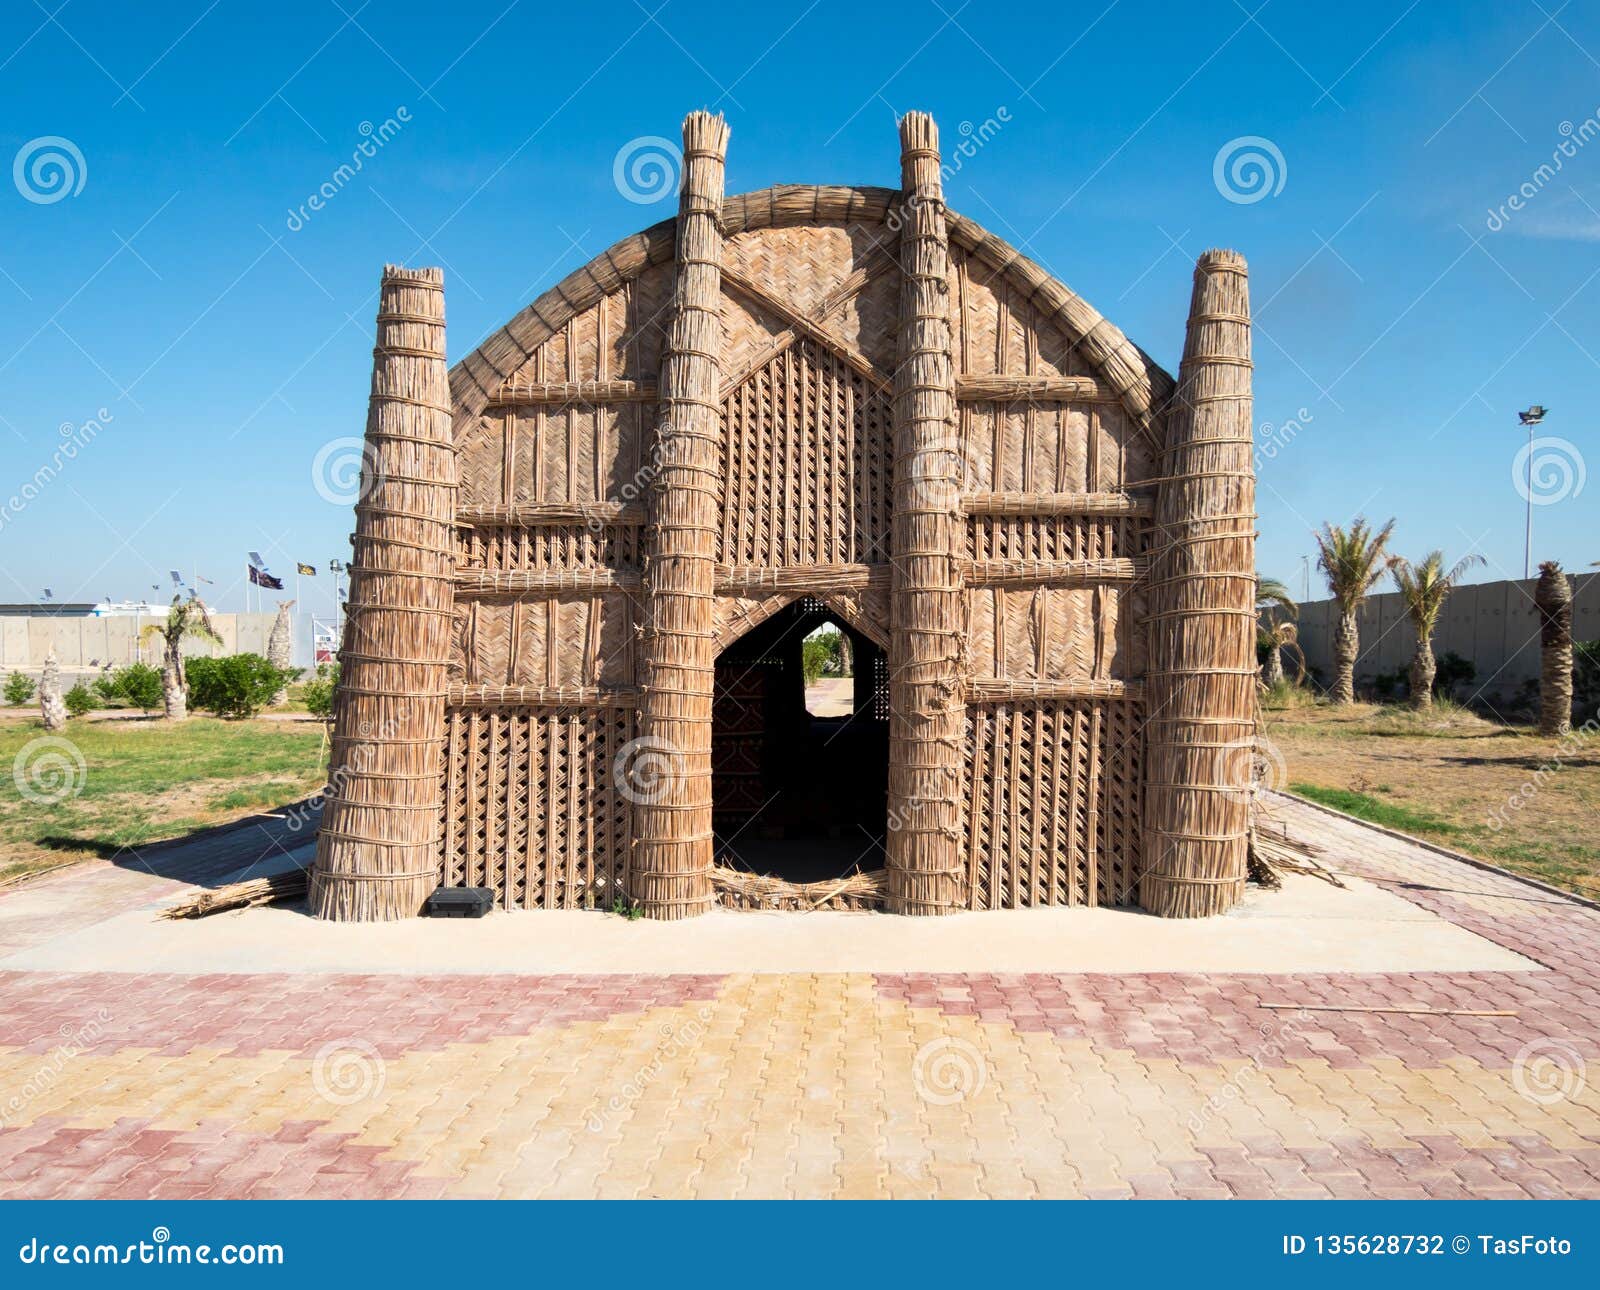 mudhif, traditional iraqi reed house of marsh arabs aka madan used for guest house and for ceremonies, majnoon, iraq, middle east